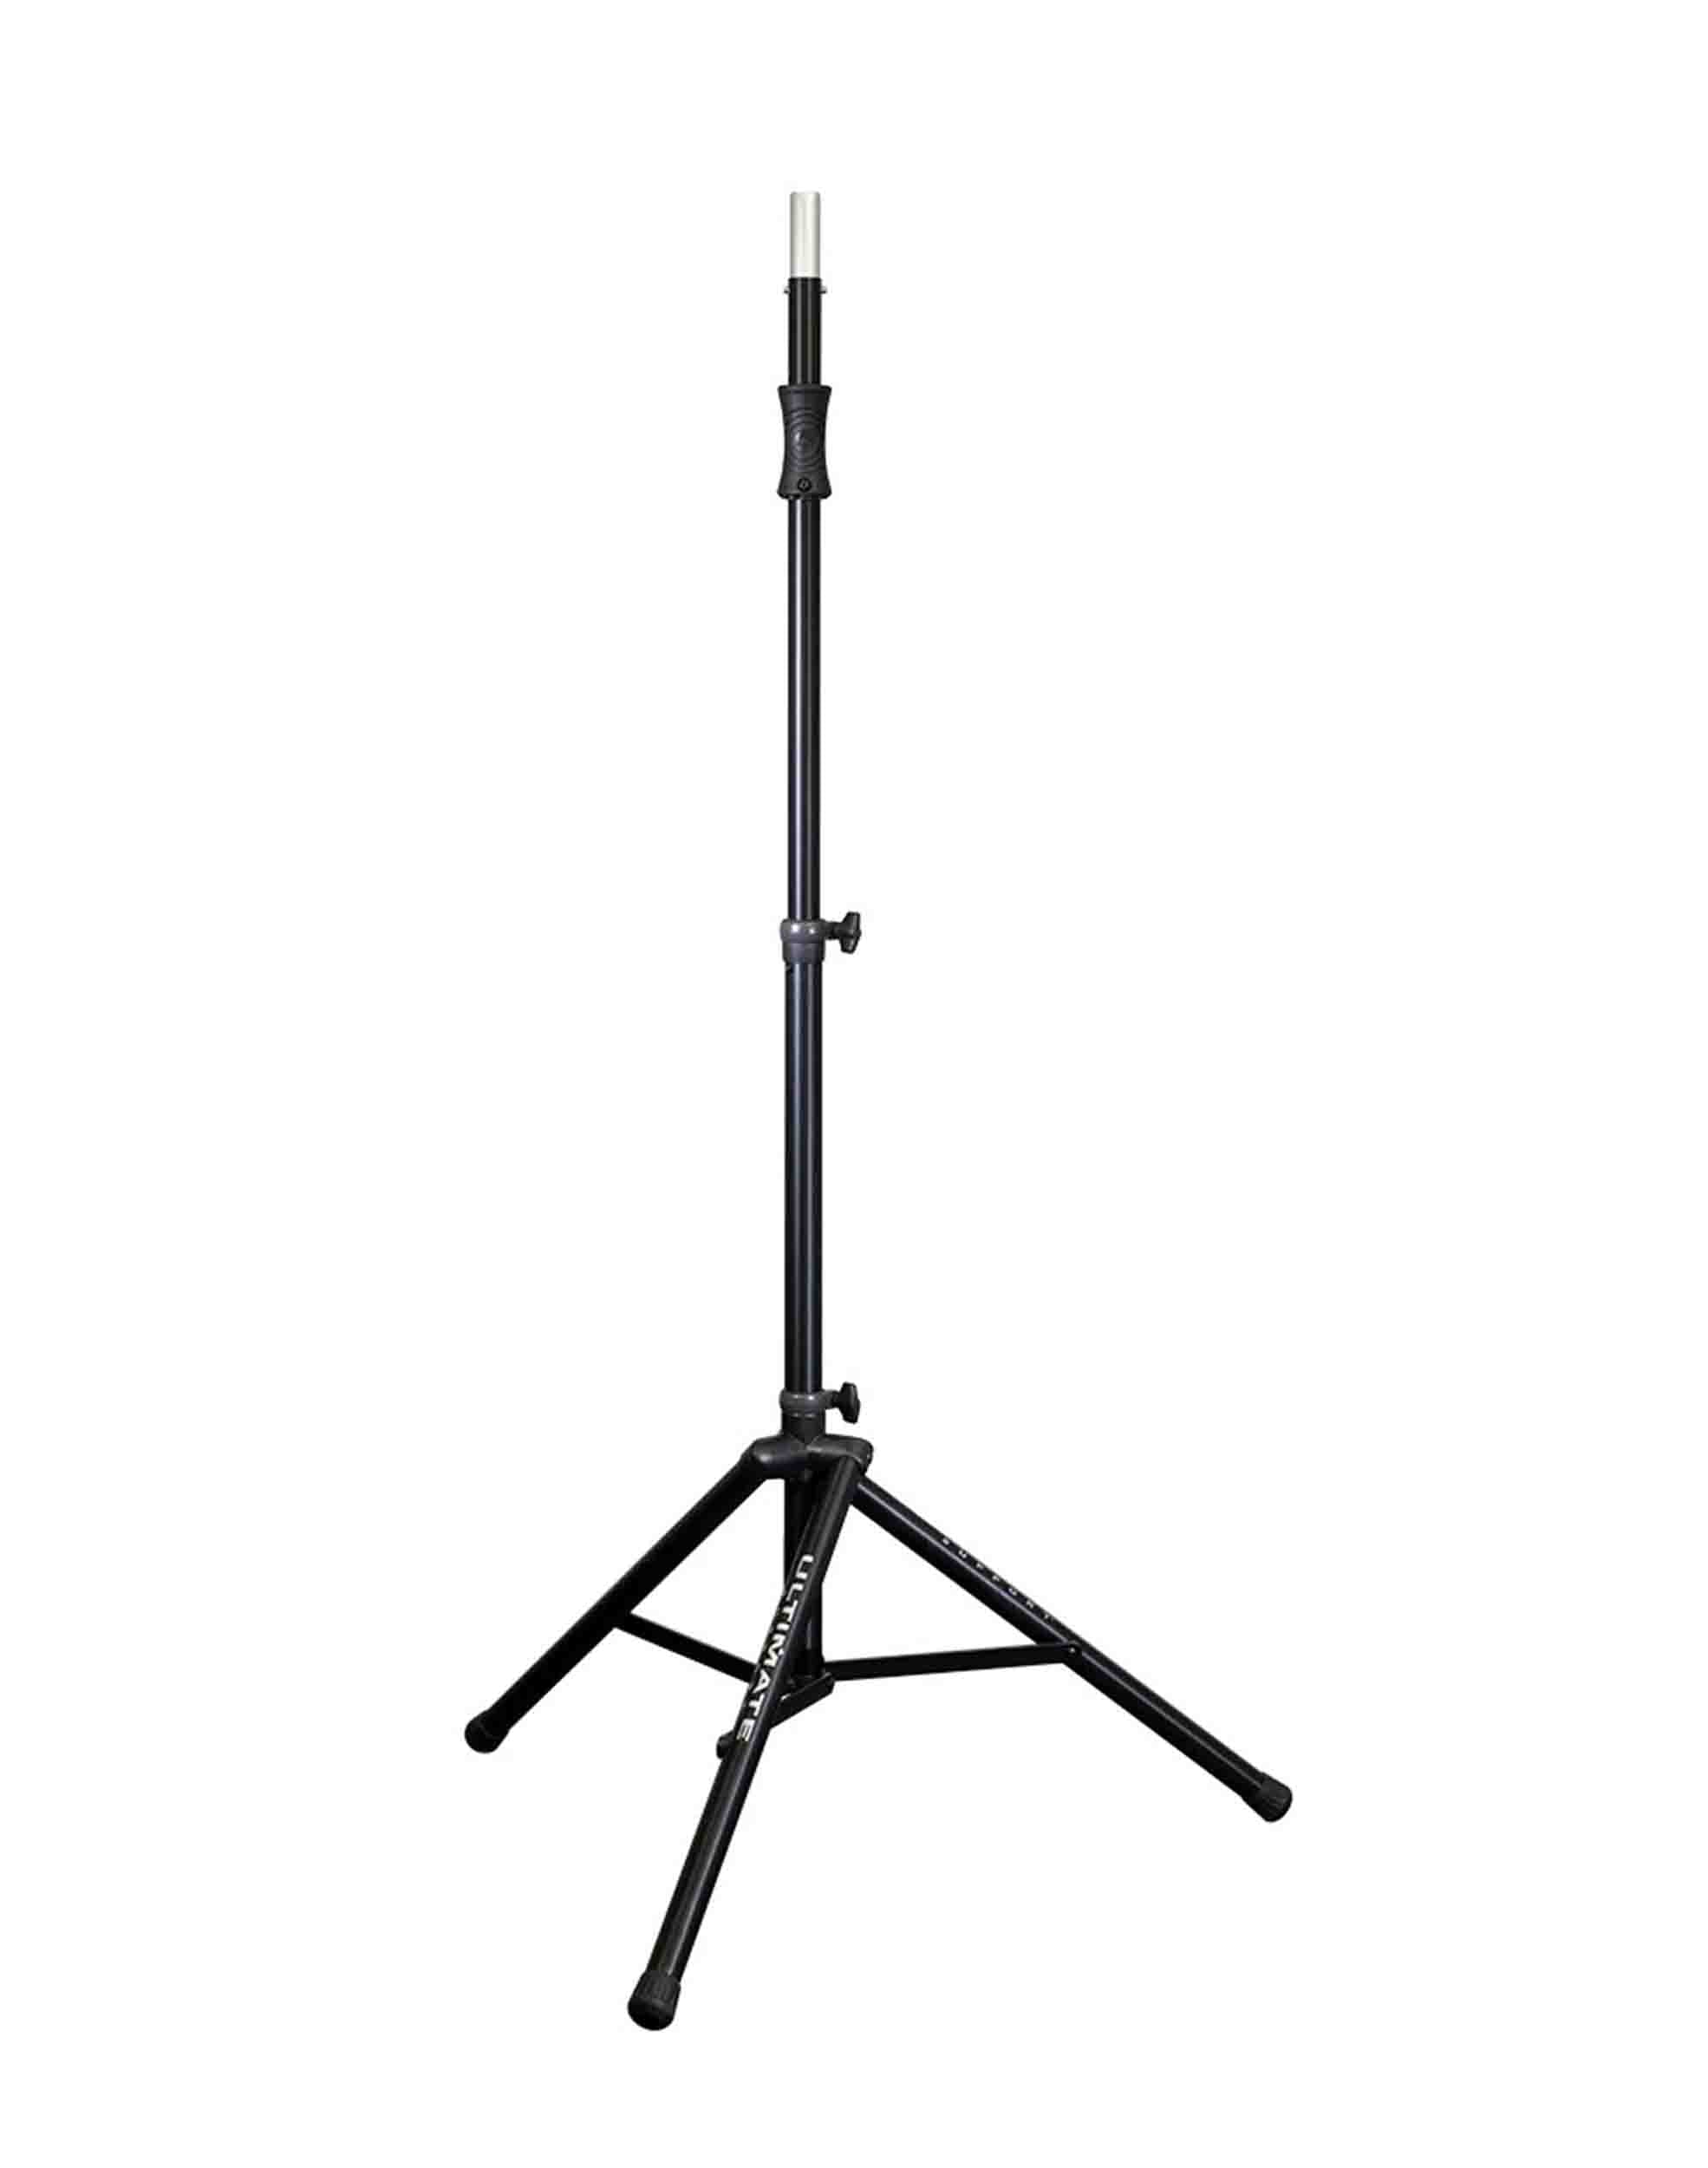 Ultimate Support TS-100B Package Lift-Assist Aluminum Tripod Speaker Stands - 2 Pack - Hollywood DJ